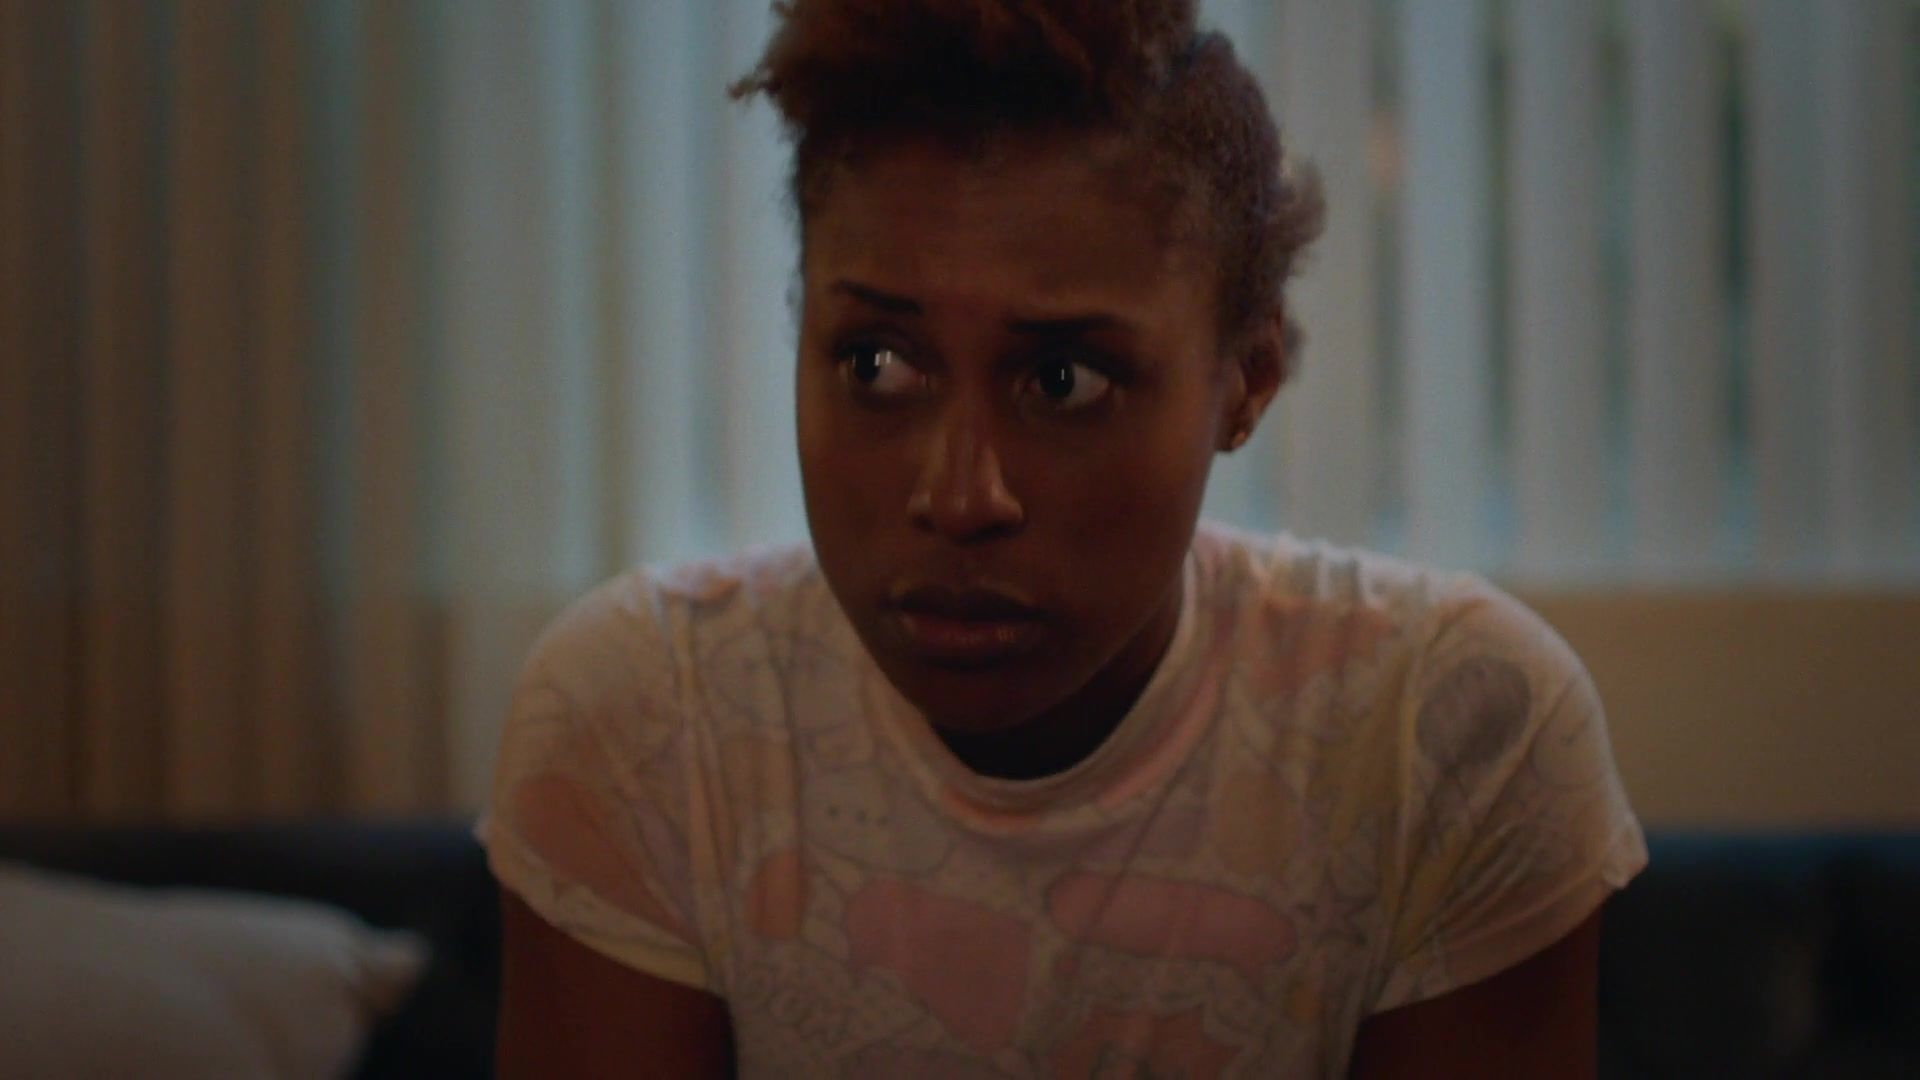 Vip-File Domnique Perry naked, Issa Rae Naked - Insecure s02e01 (2017) Neighbor - 1